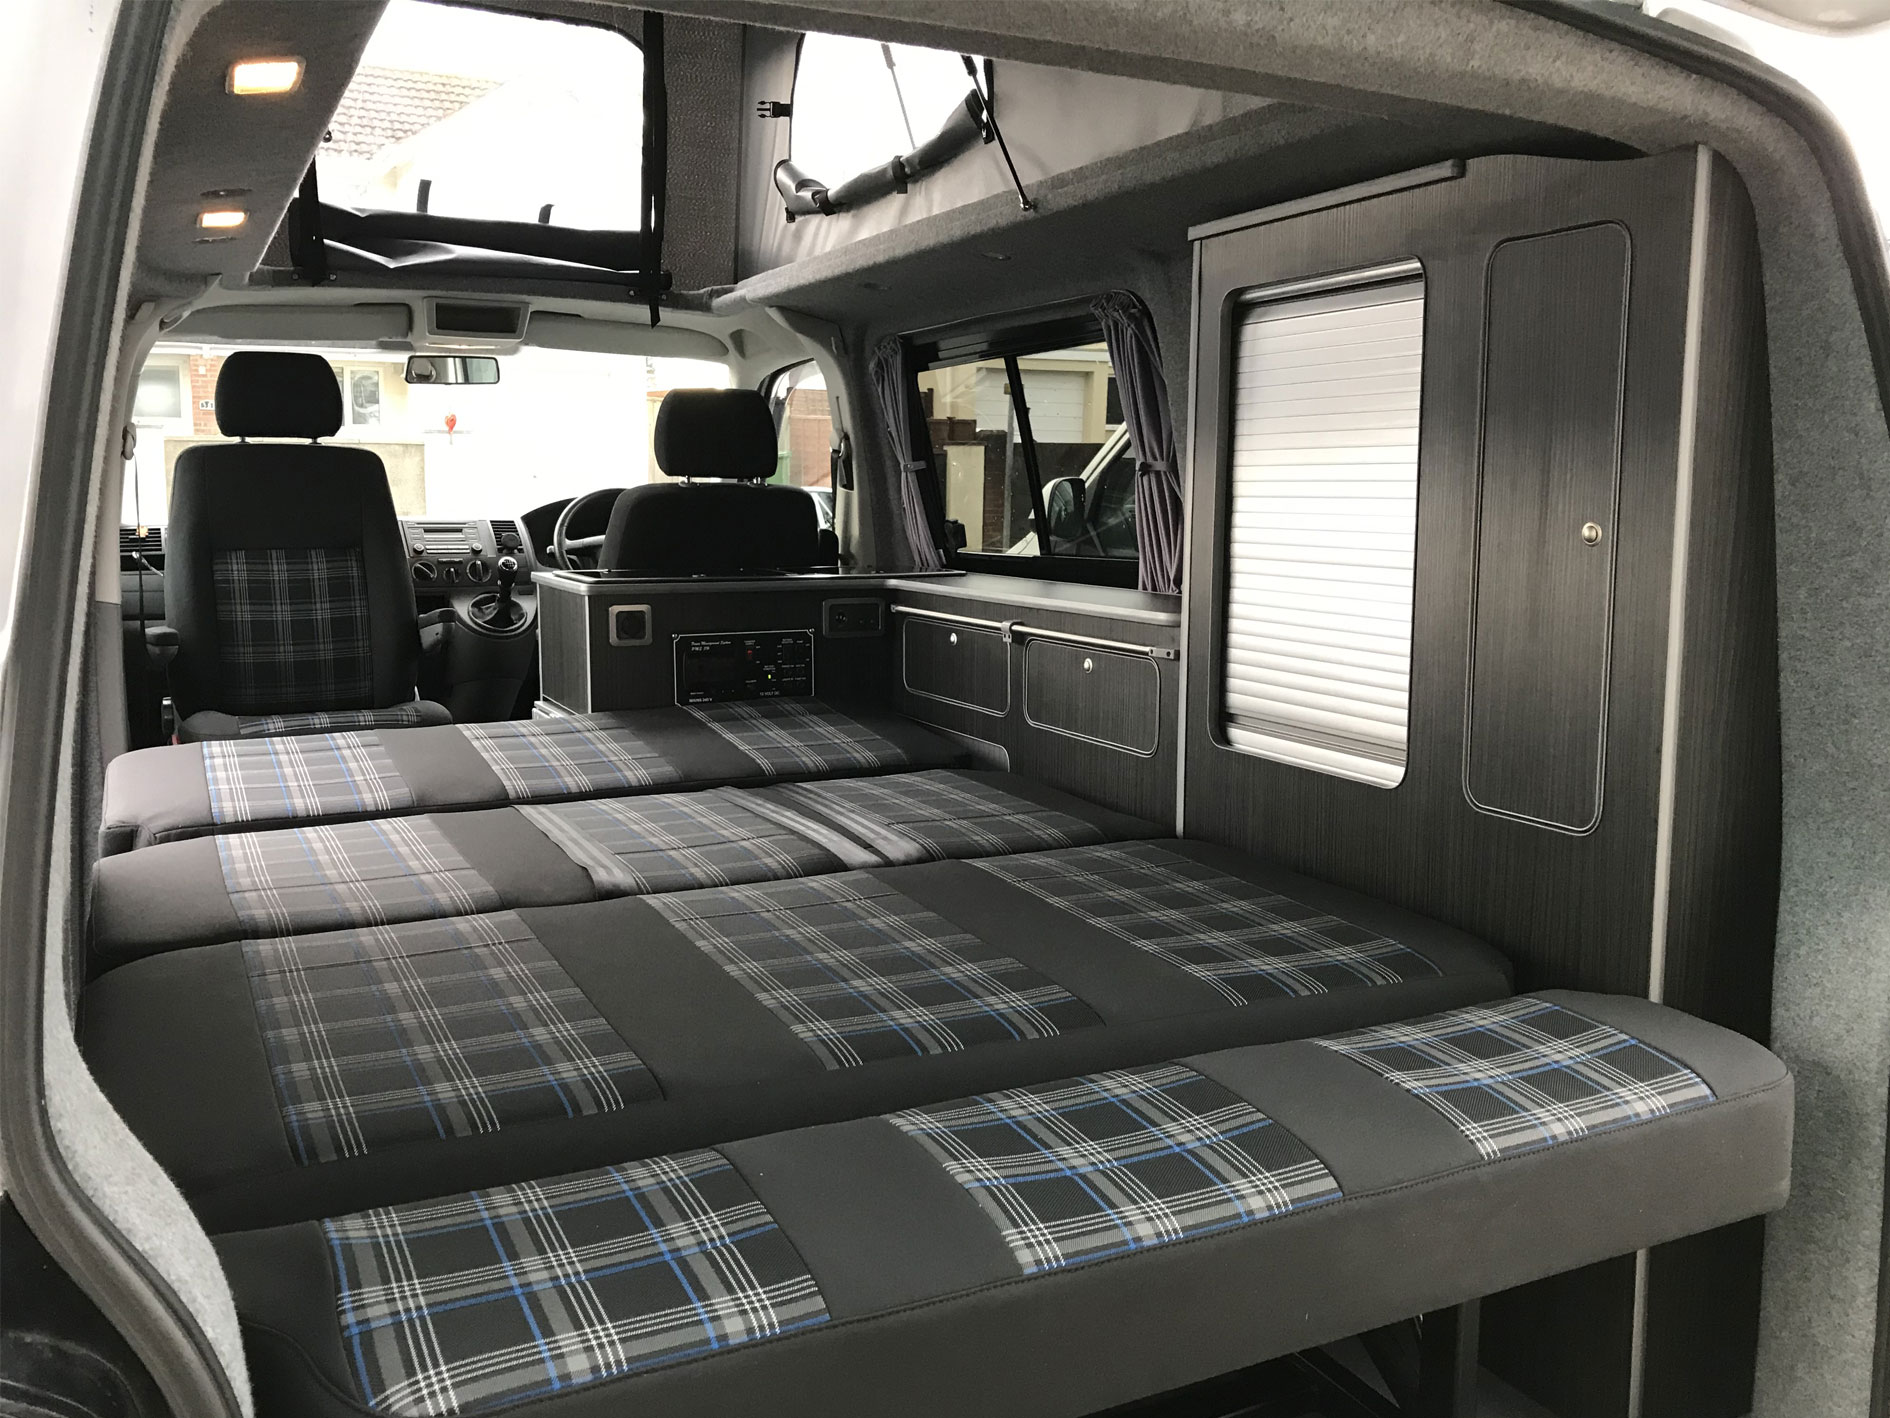 drake campervan interior design with charcoal tartan fabric seats converted into large bed sleeping area